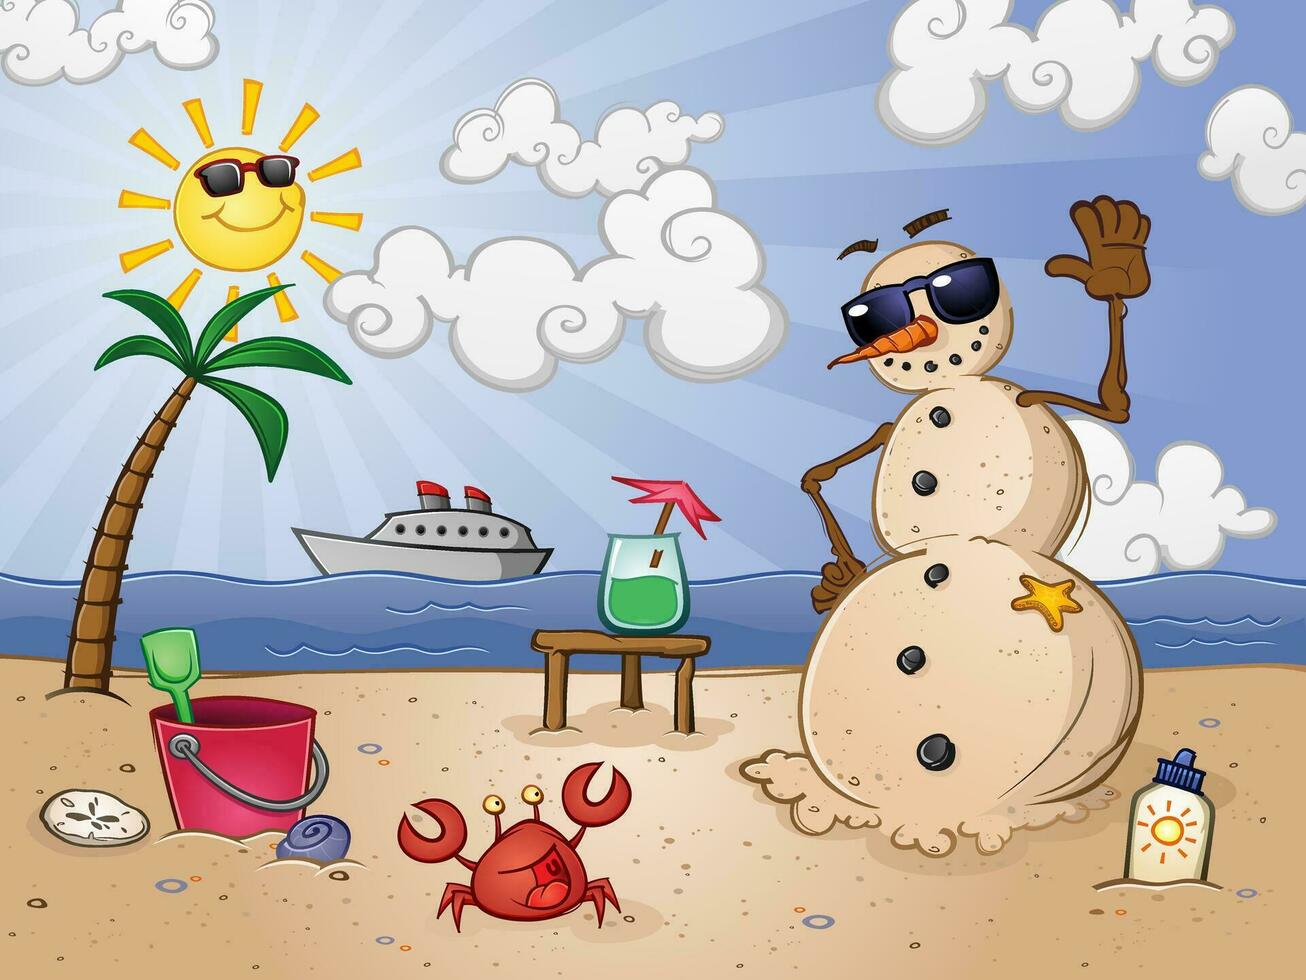 A snowman made of sand, lounging on a tropical beach with toys and friends as a cruise ship passes by in the ocean vector